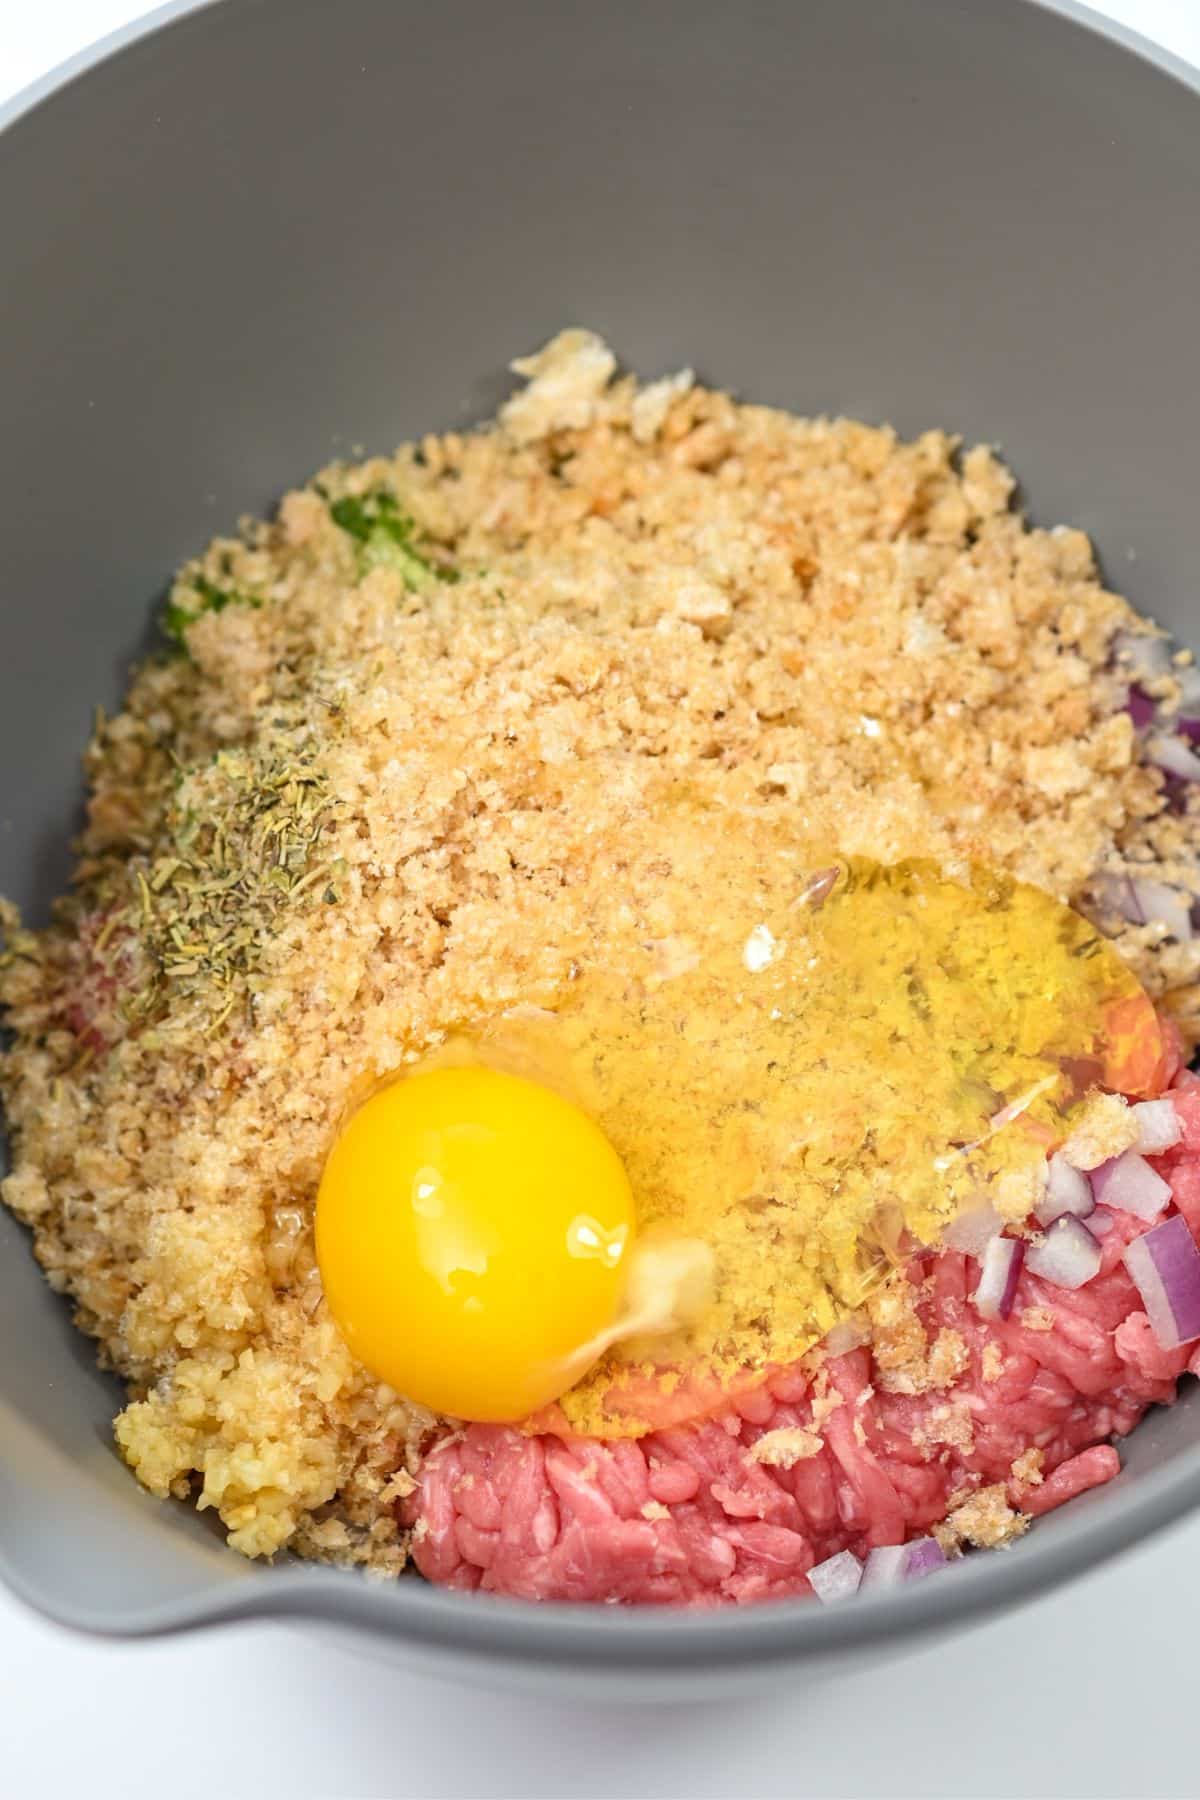 ground turkey, onion, peppers, garlic, egg, pork rind crumbs, Italian seasoning and salt and pepper to taste to a large mixing bowl